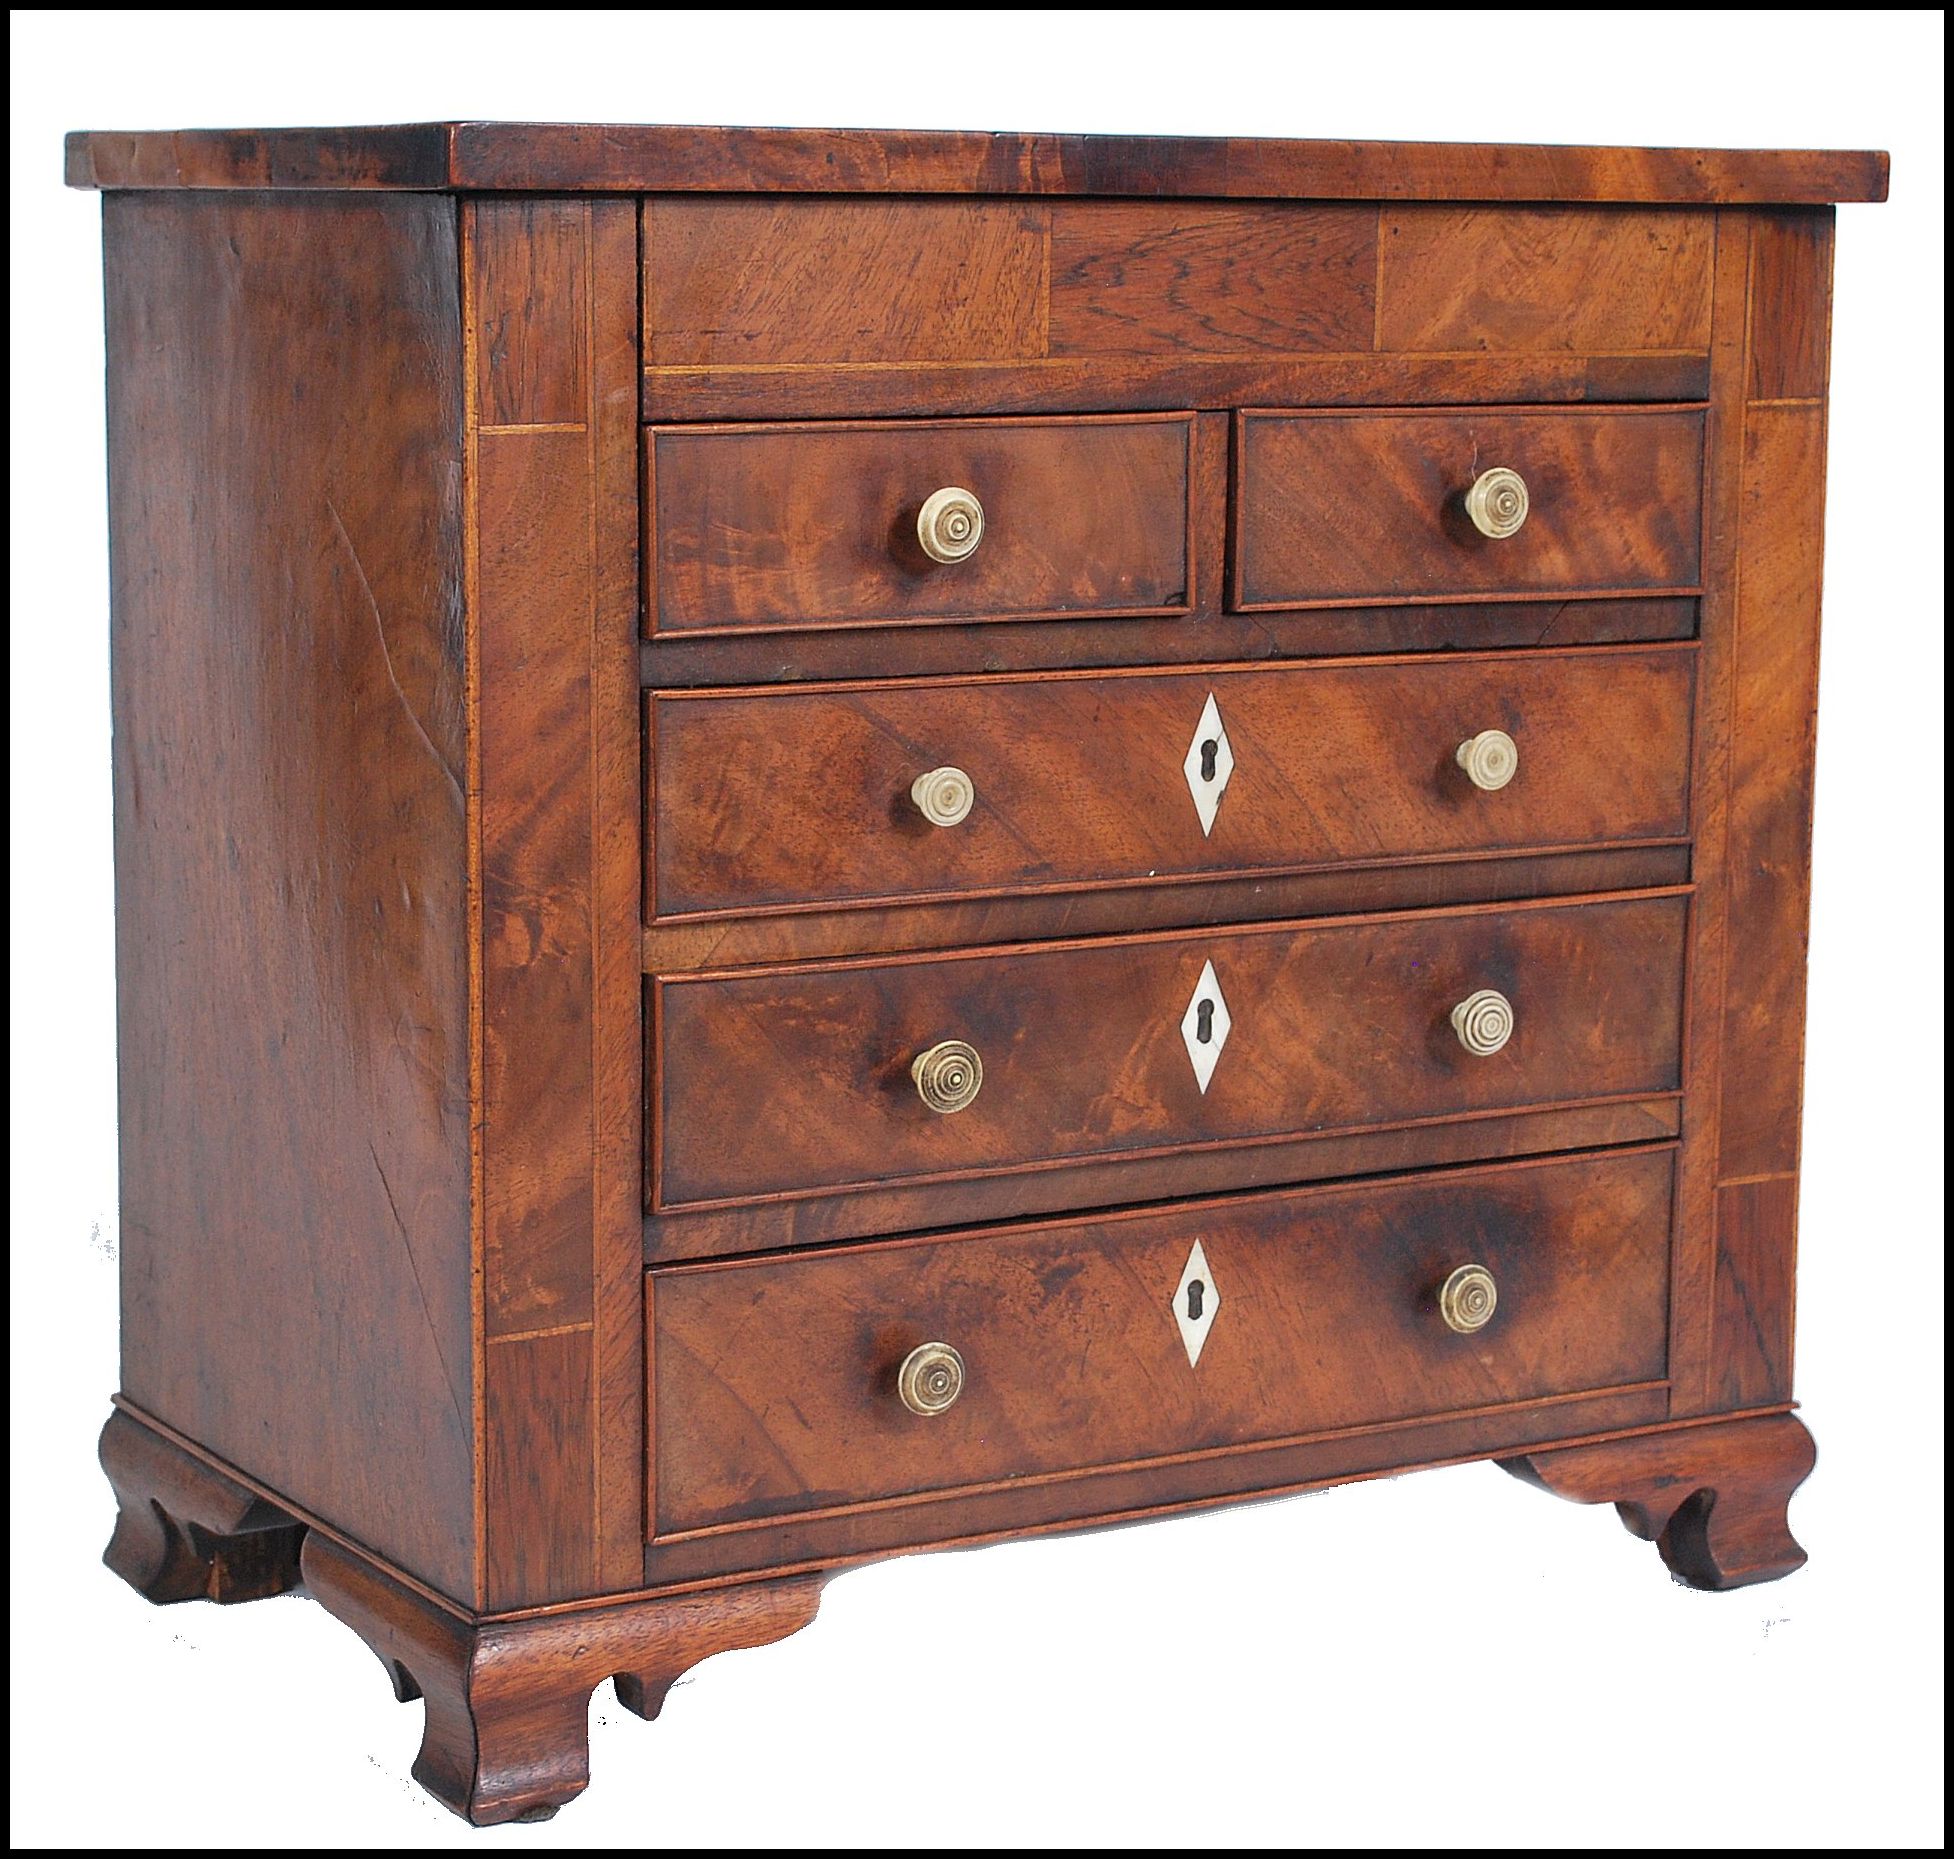 19TH CENTURY GEORGE 3RD MAHOGANY APPRENTICE PIECE CHEST OF DRAWERS